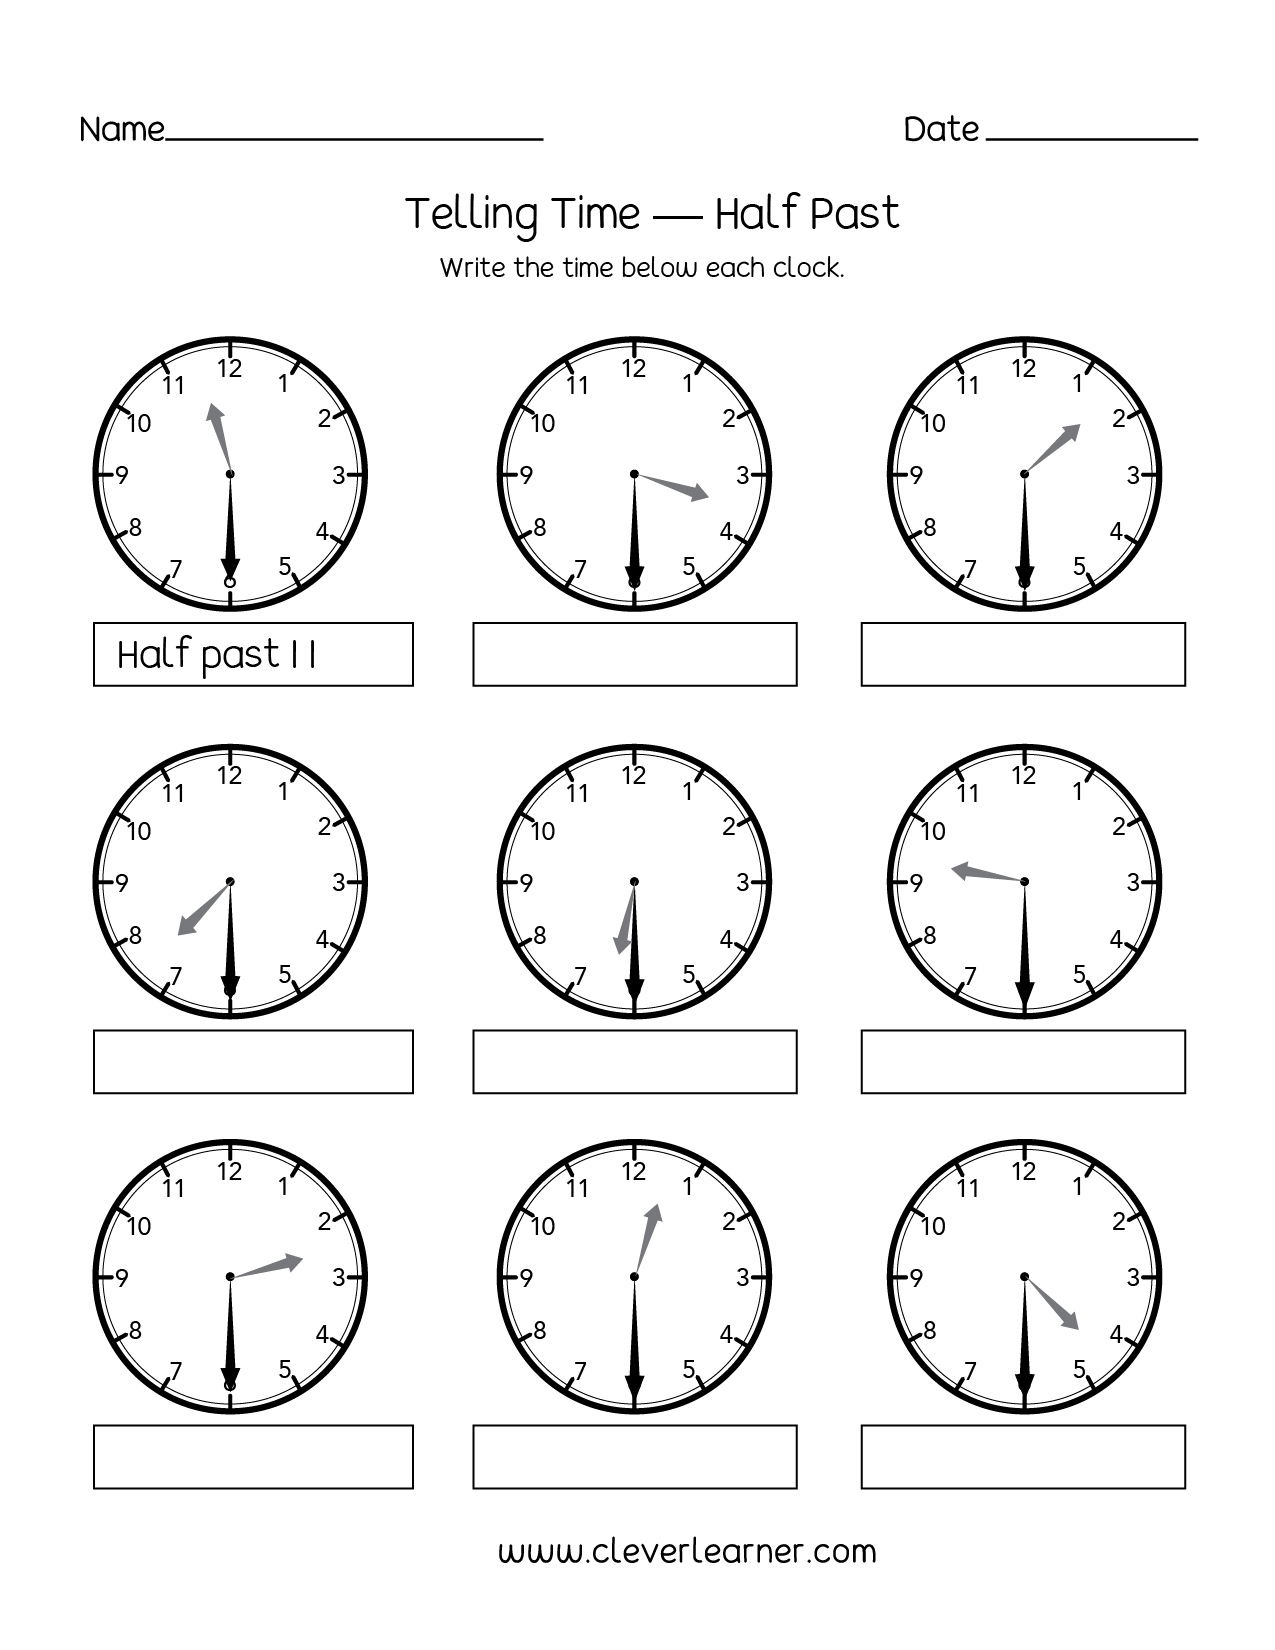 Telling time half past the hour worksheets for 1st and 2nd ...